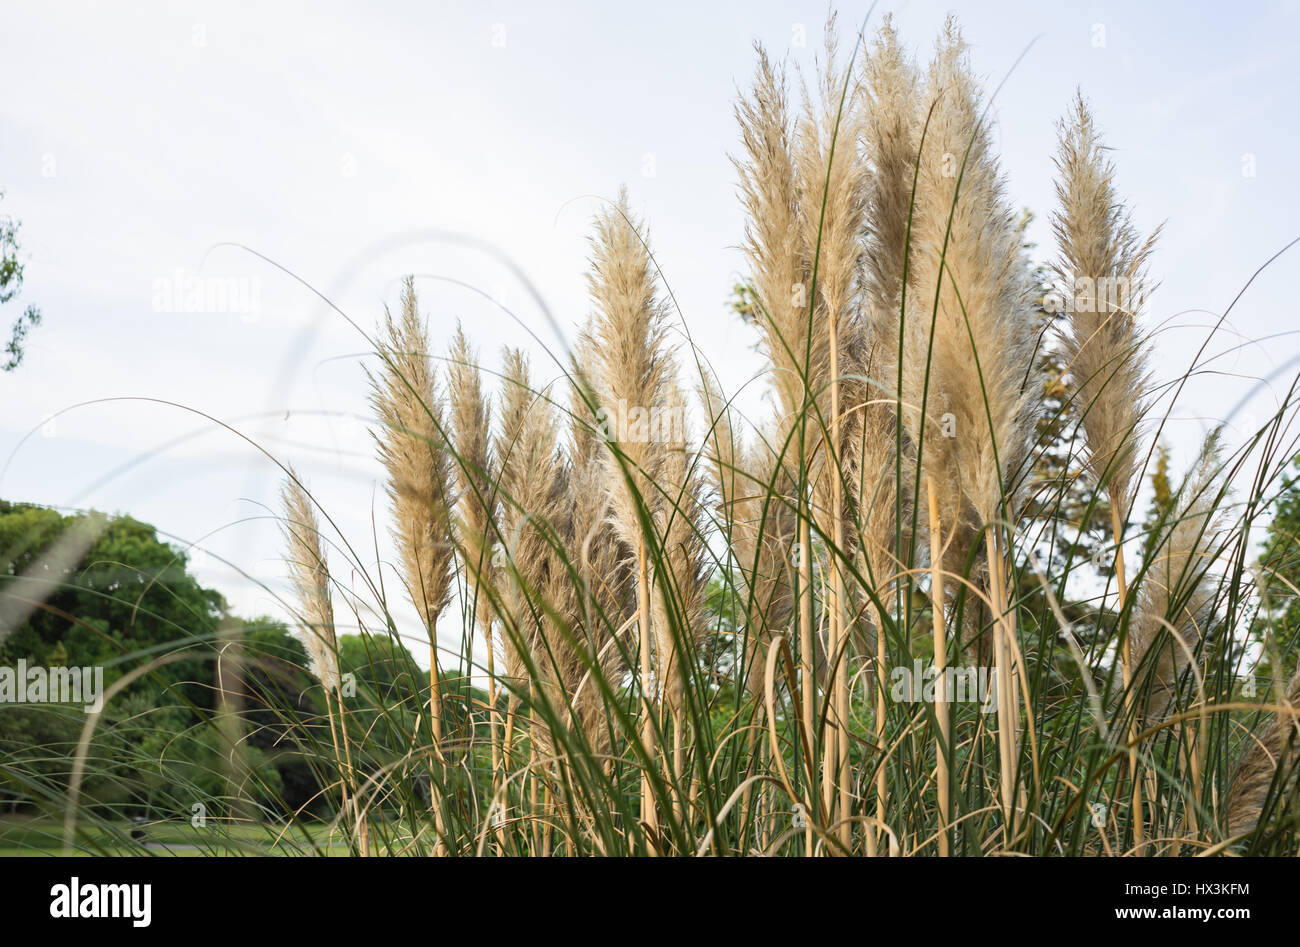 Oriental grass in a park Stock Photo